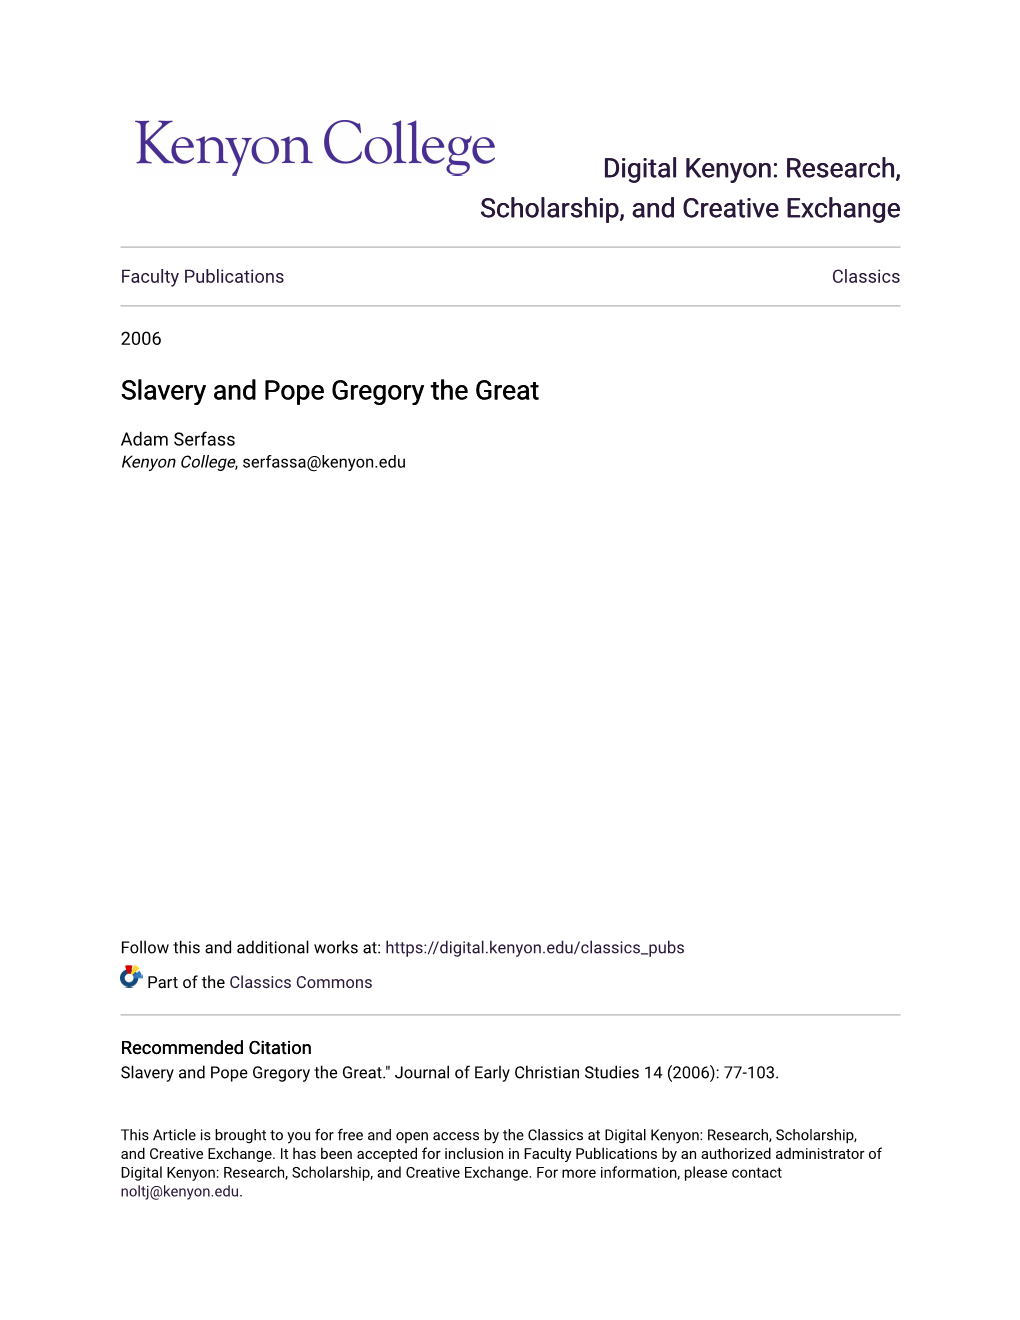 Slavery and Pope Gregory the Great